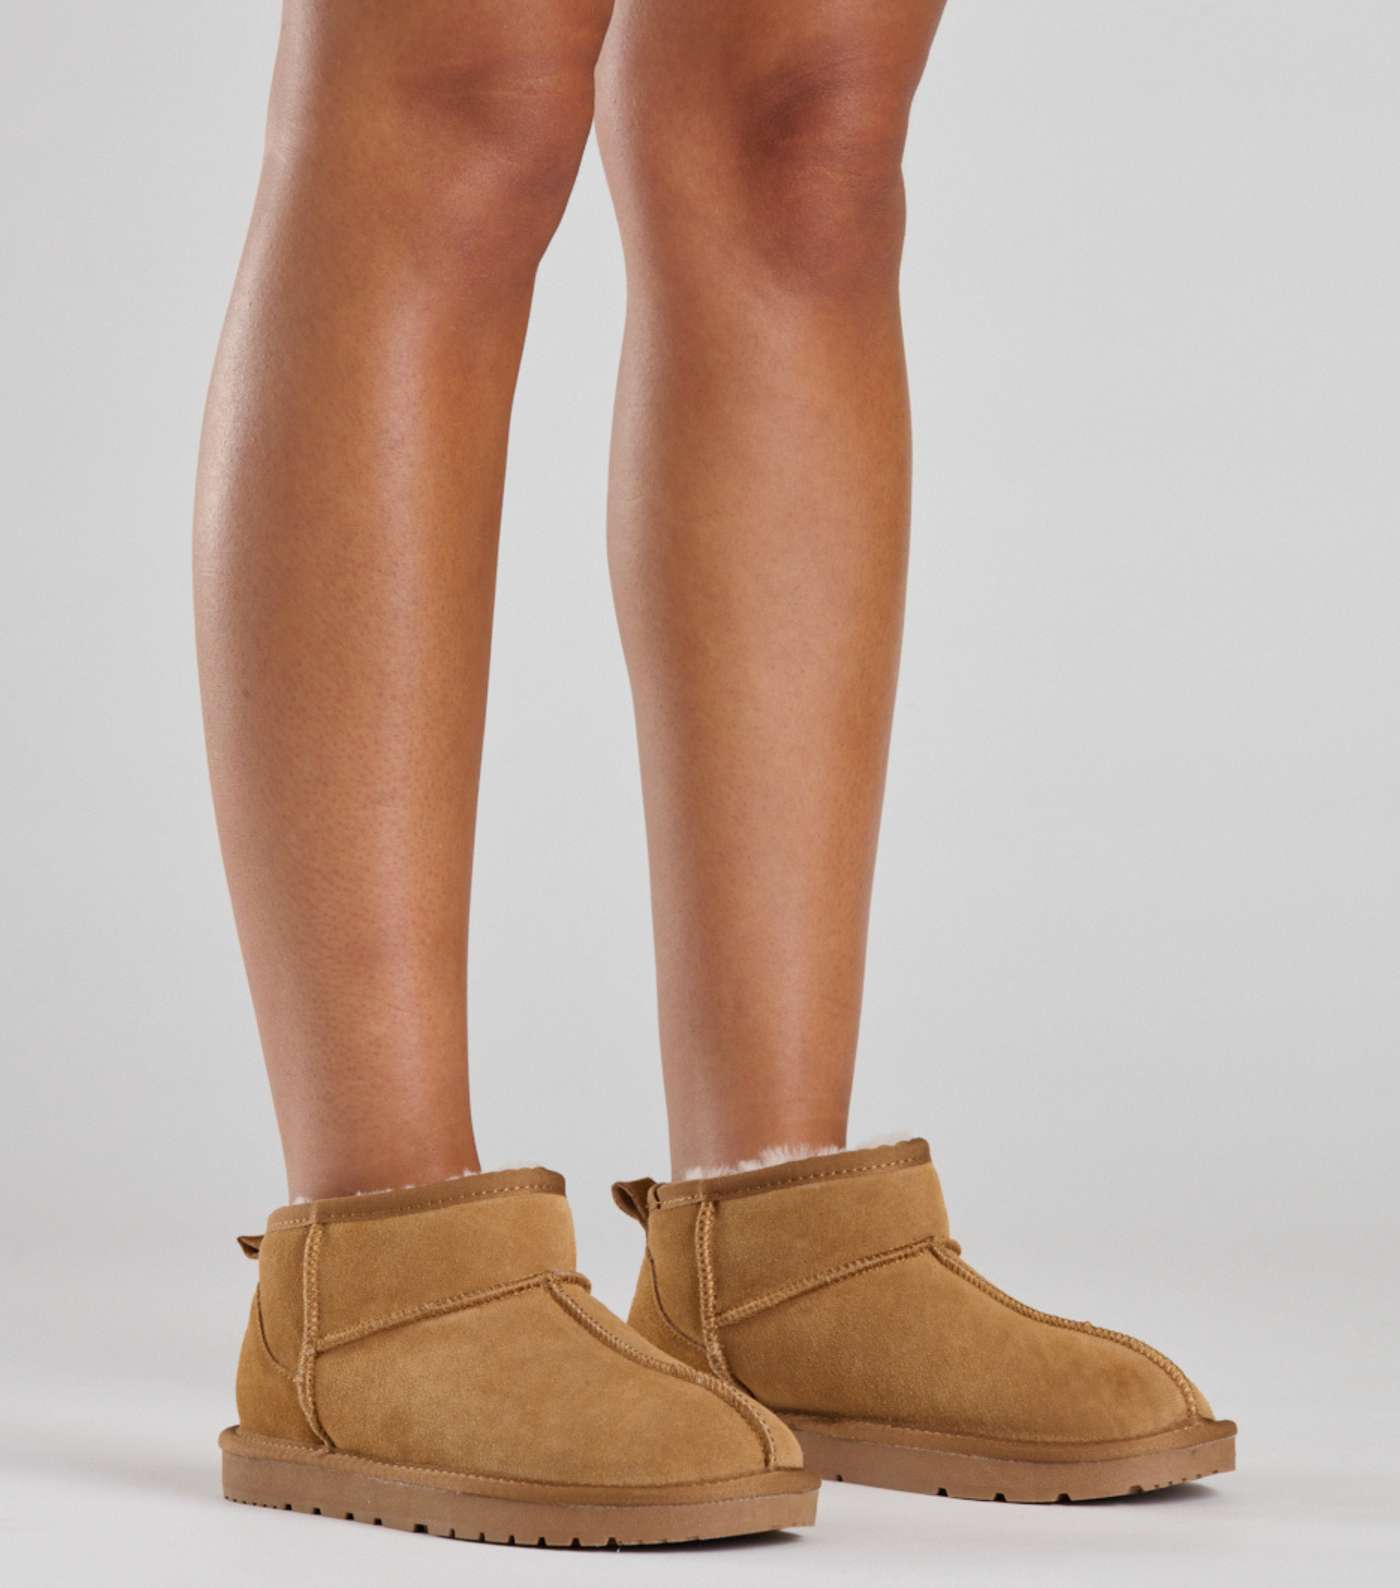 Loungeable Tan Real Sheepskin Slipper Boots Image 2